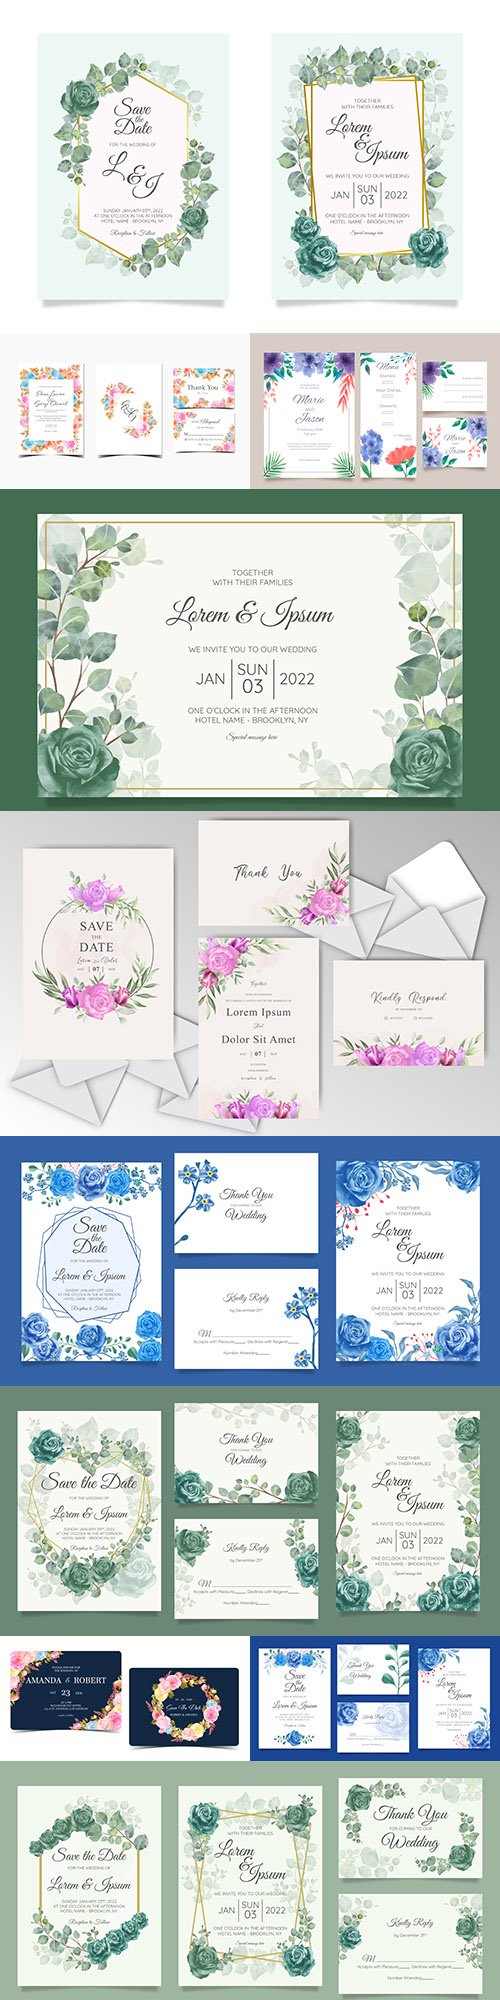 Watercolor wedding invitations with floral elegant template